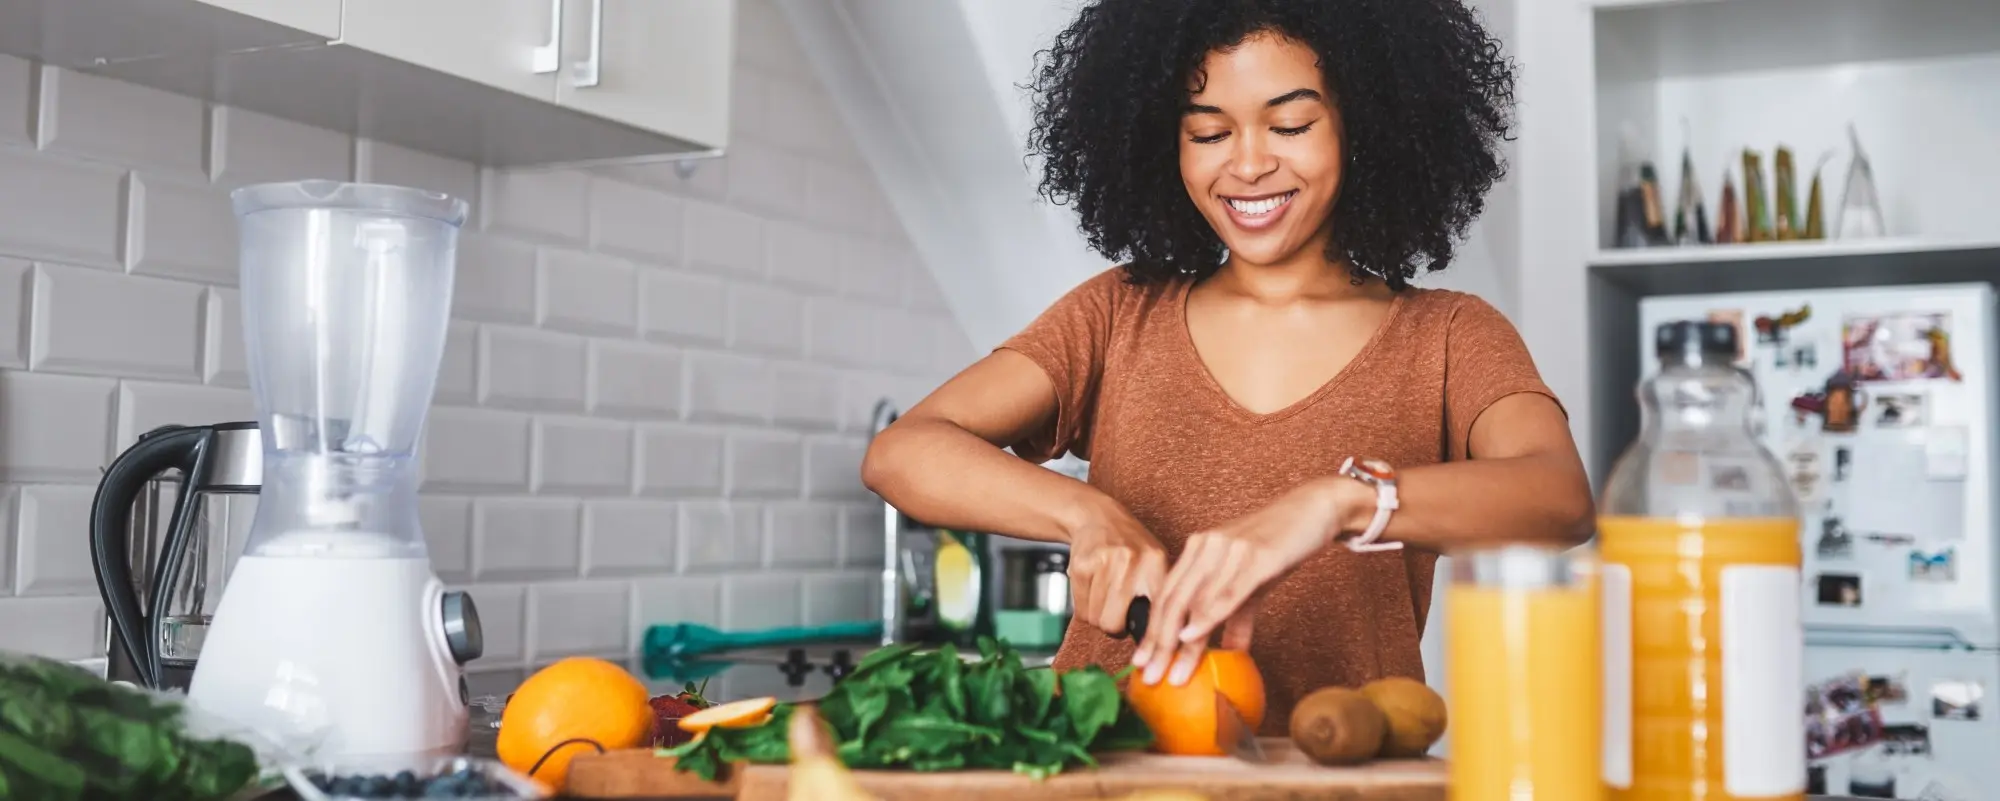 How to help optimize your mental health through food Hero Image